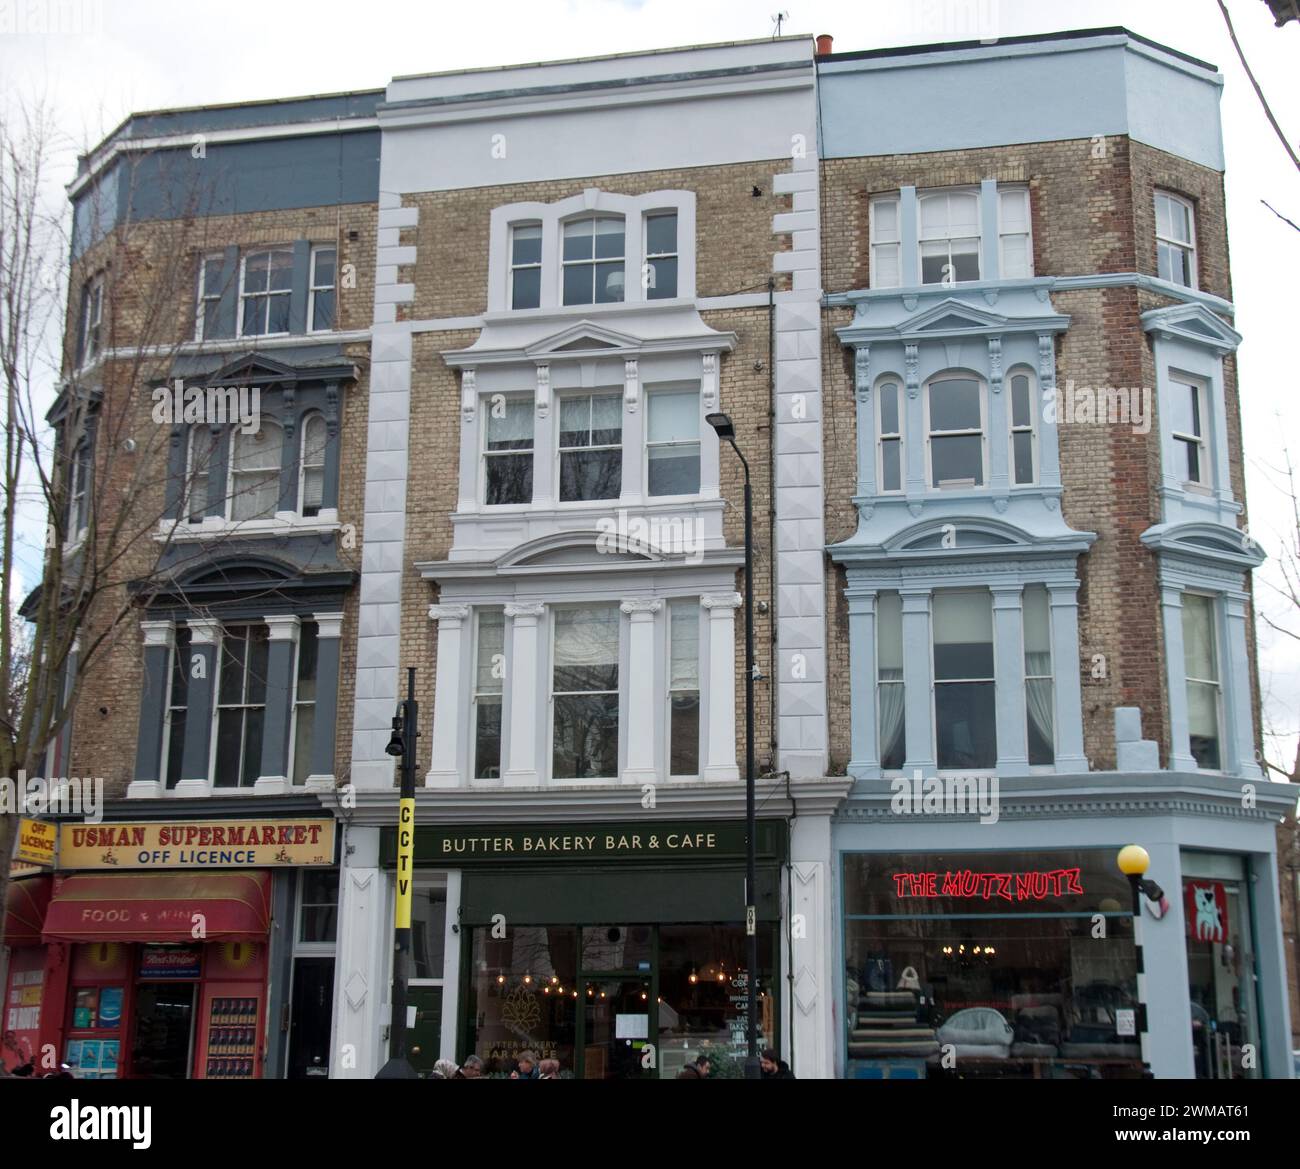 Attractive buildings, Notting Hill, Royal Borough of Kensington and Chelsea; London, UK.  Shops on ground floor. Stock Photo